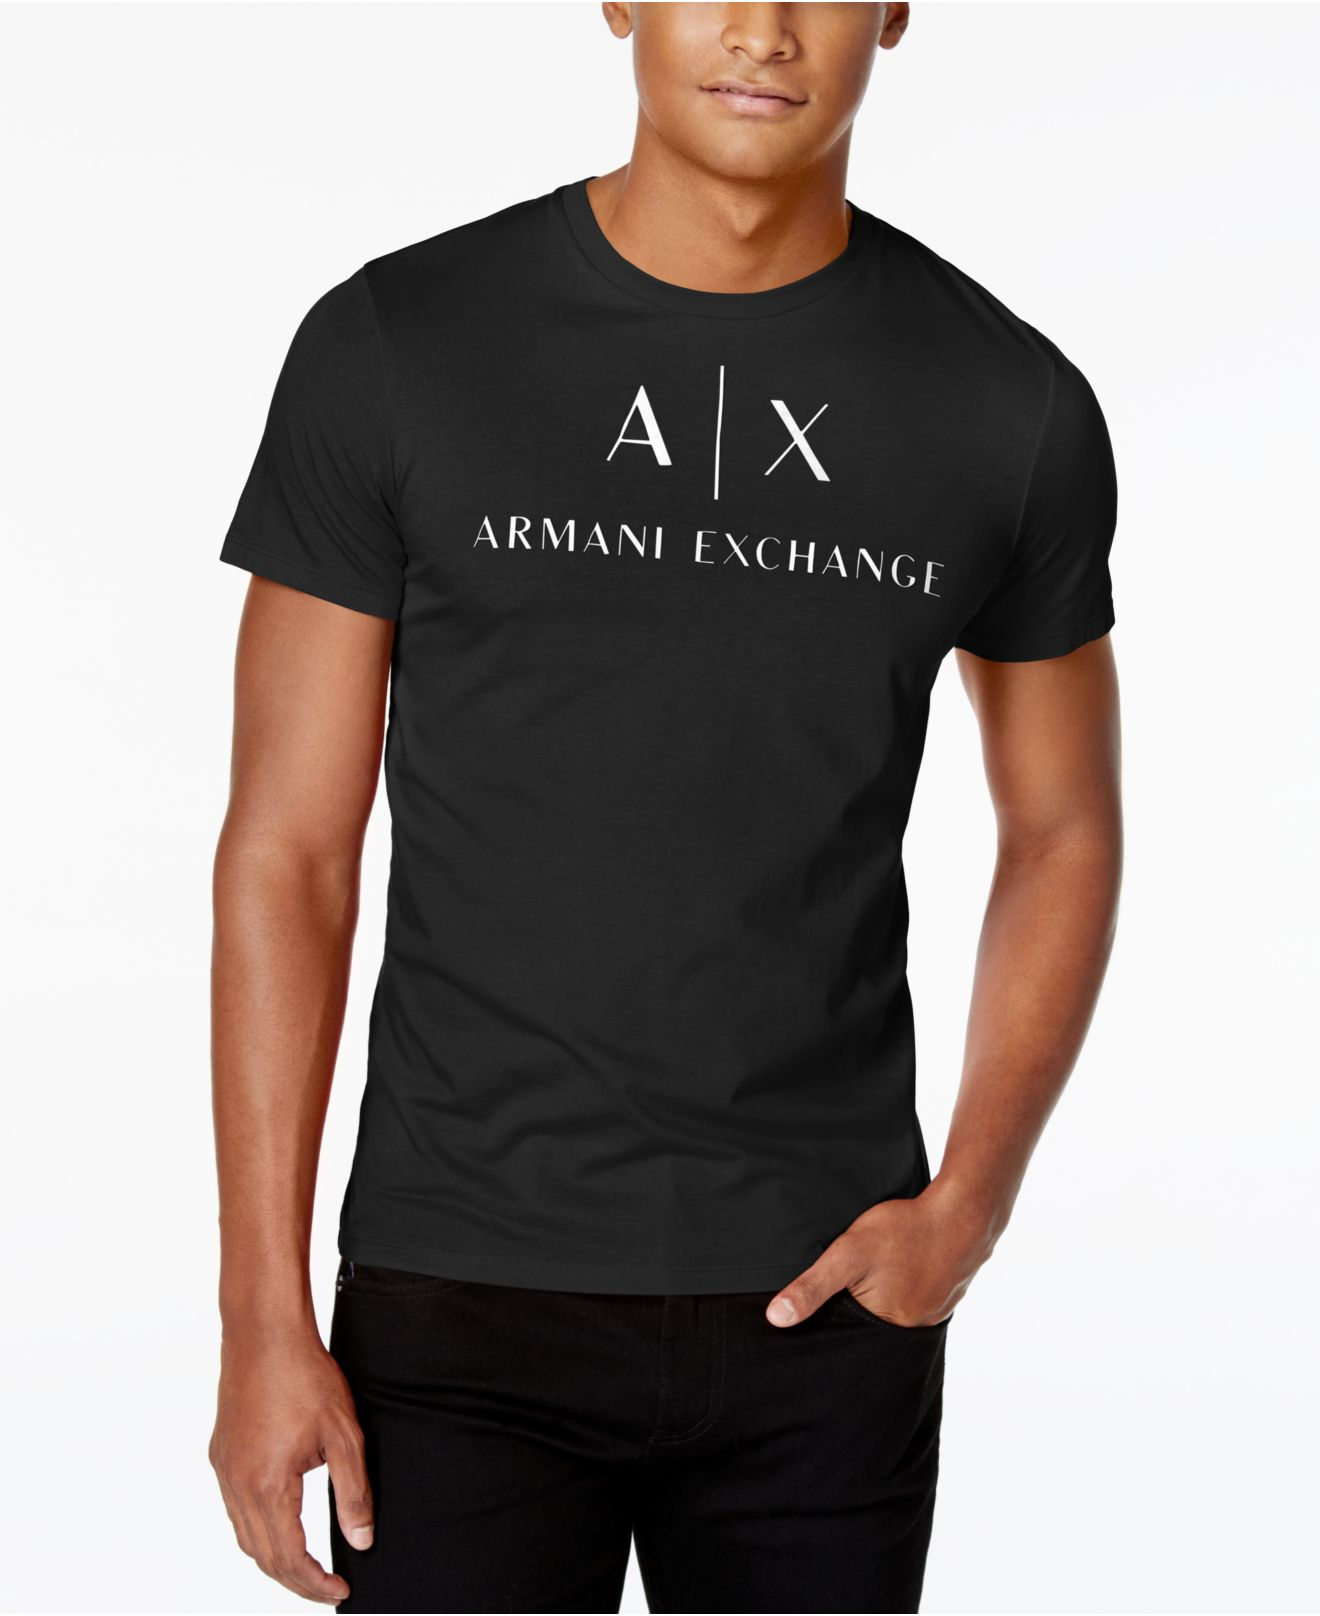 Armani exchange t shirts for mens price Hanalei Ugly sweater christmas party invitations free 